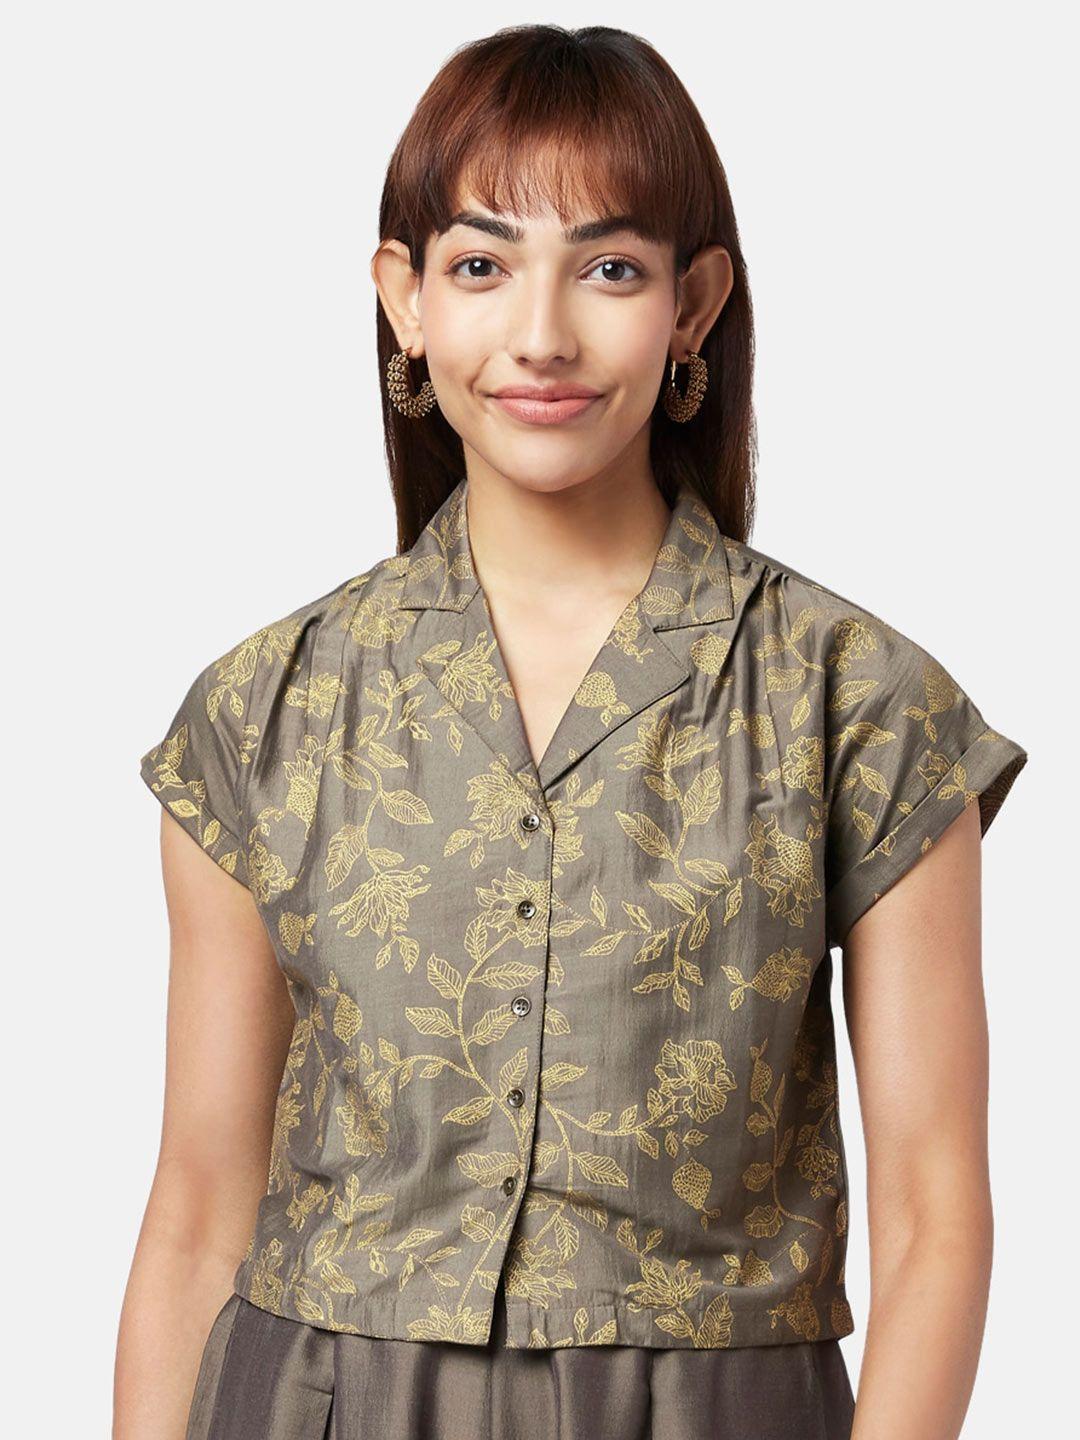 akkriti by pantaloons charcoal floral print extended sleeves shirt style top